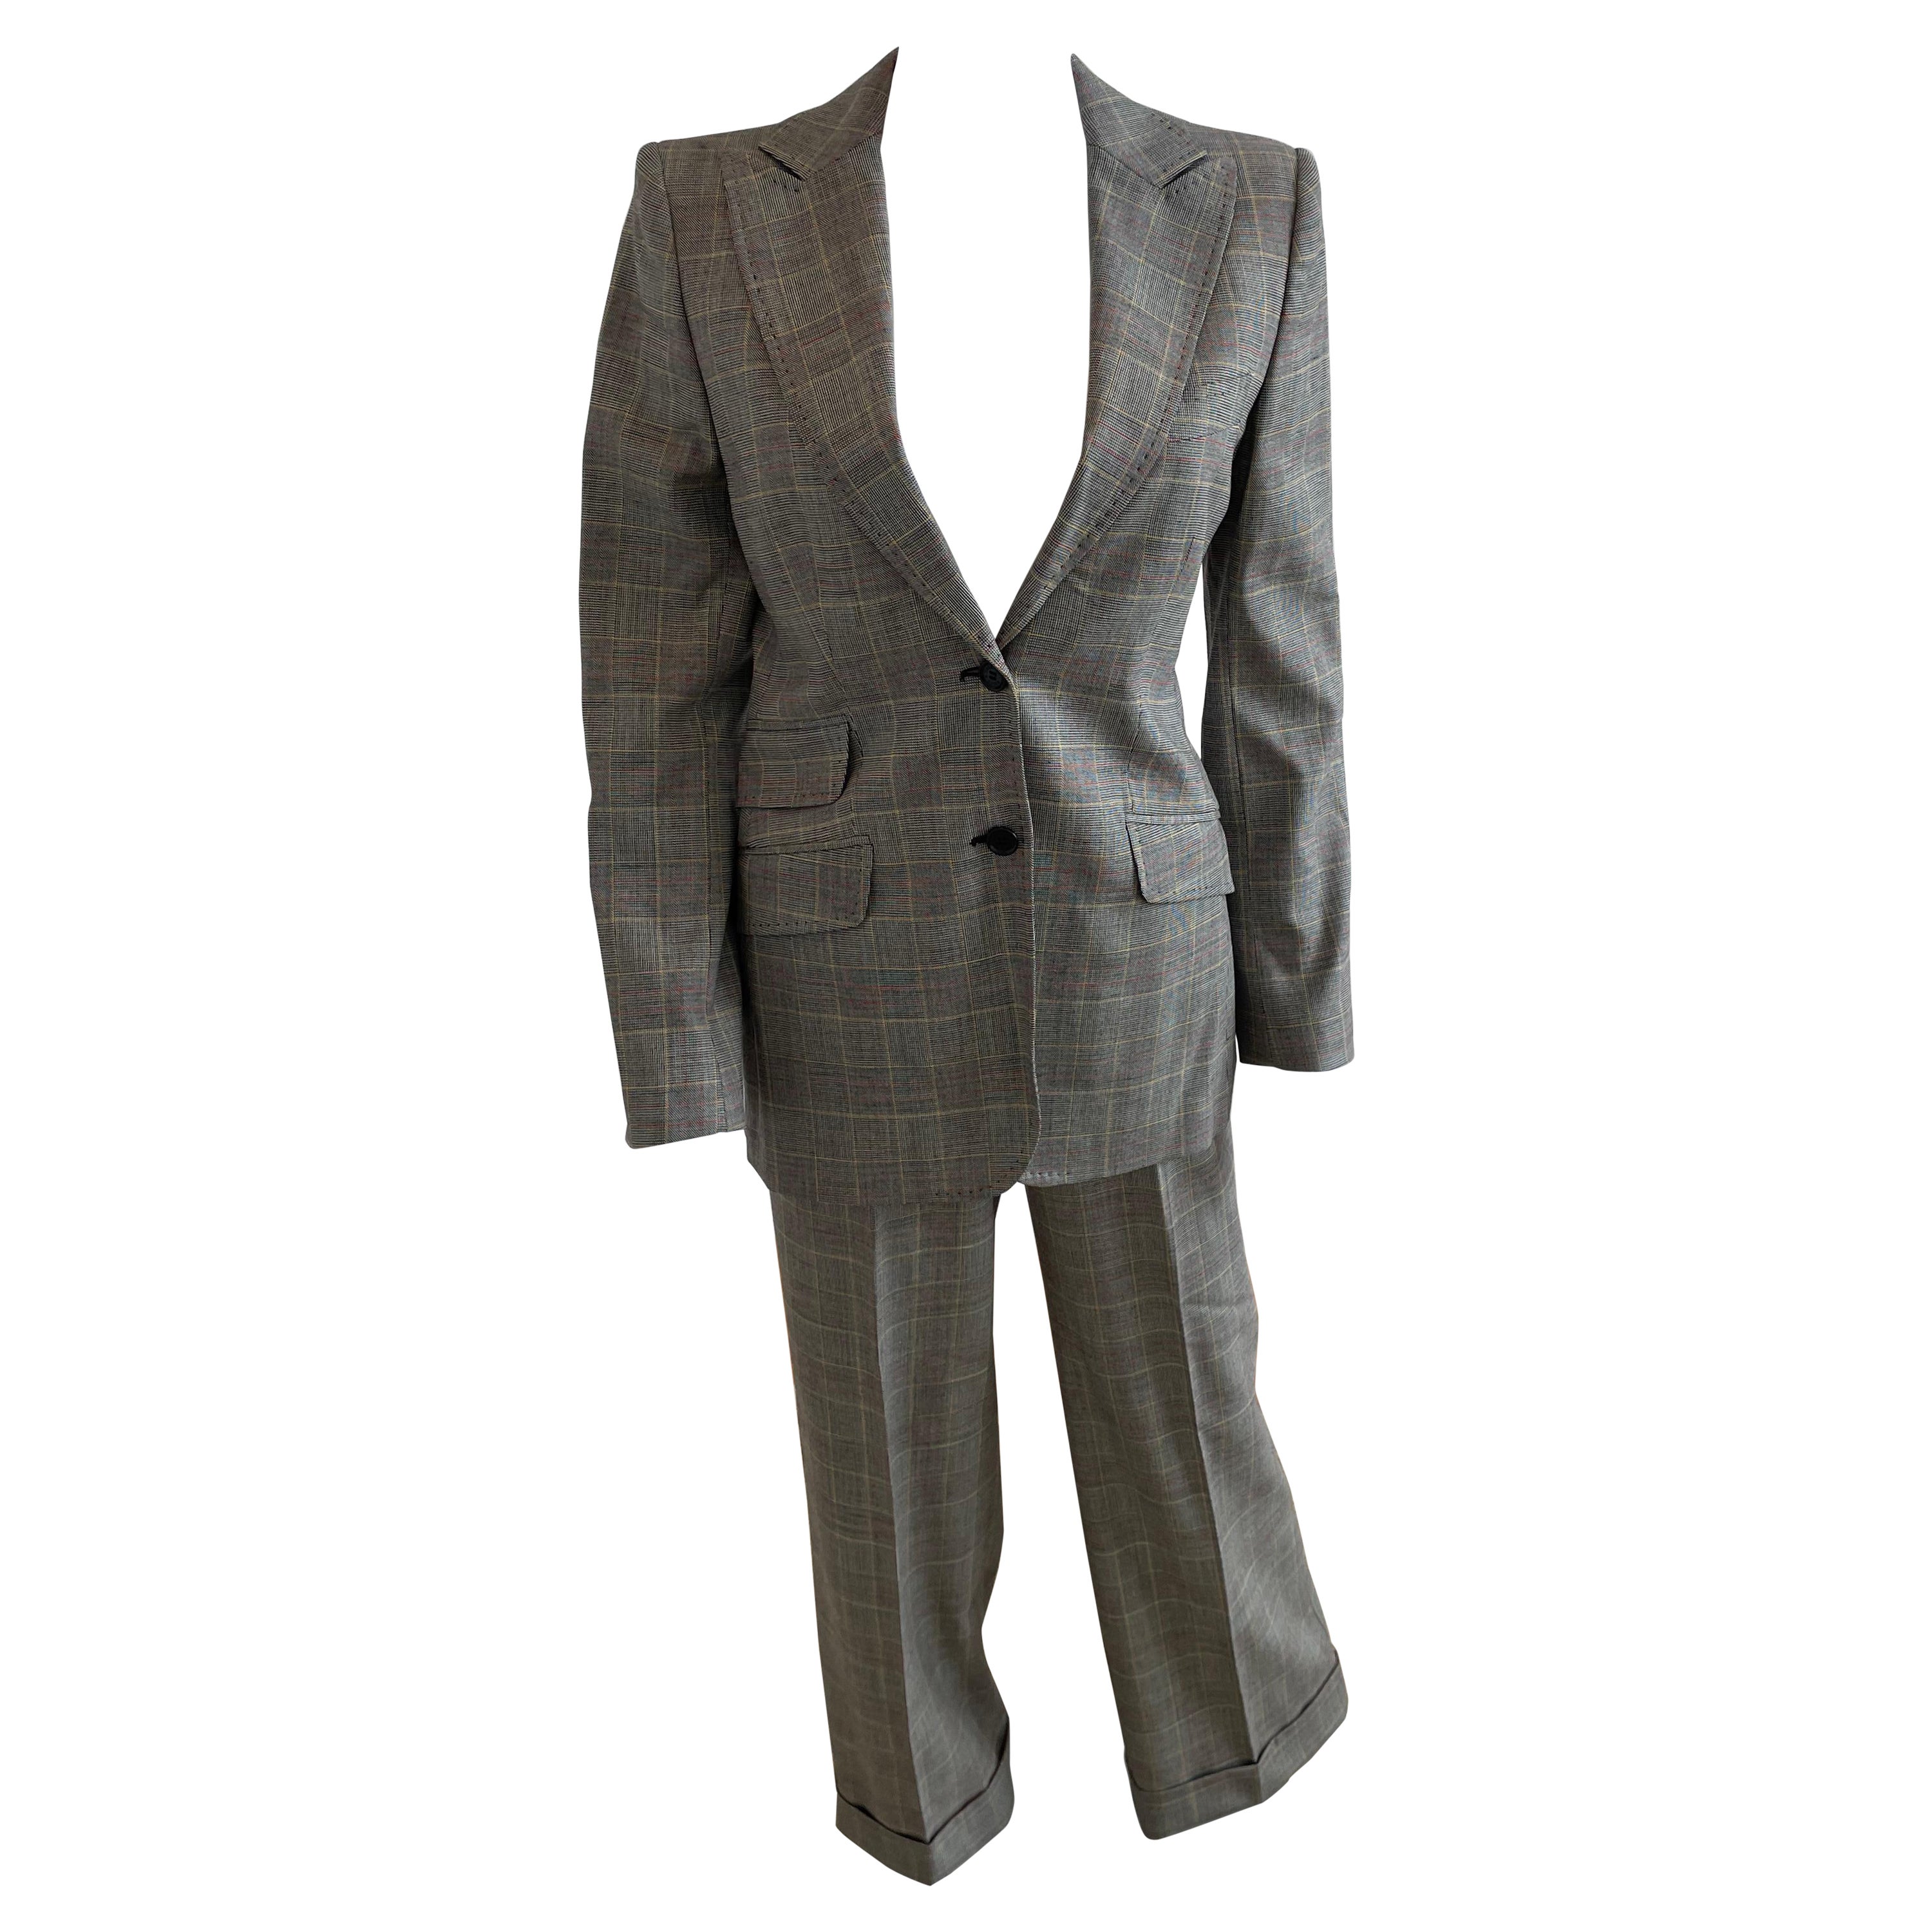 Dolce and Gabbana Wool Plaid Peak Lapel Blazer with Matching Pants Suit For Sale